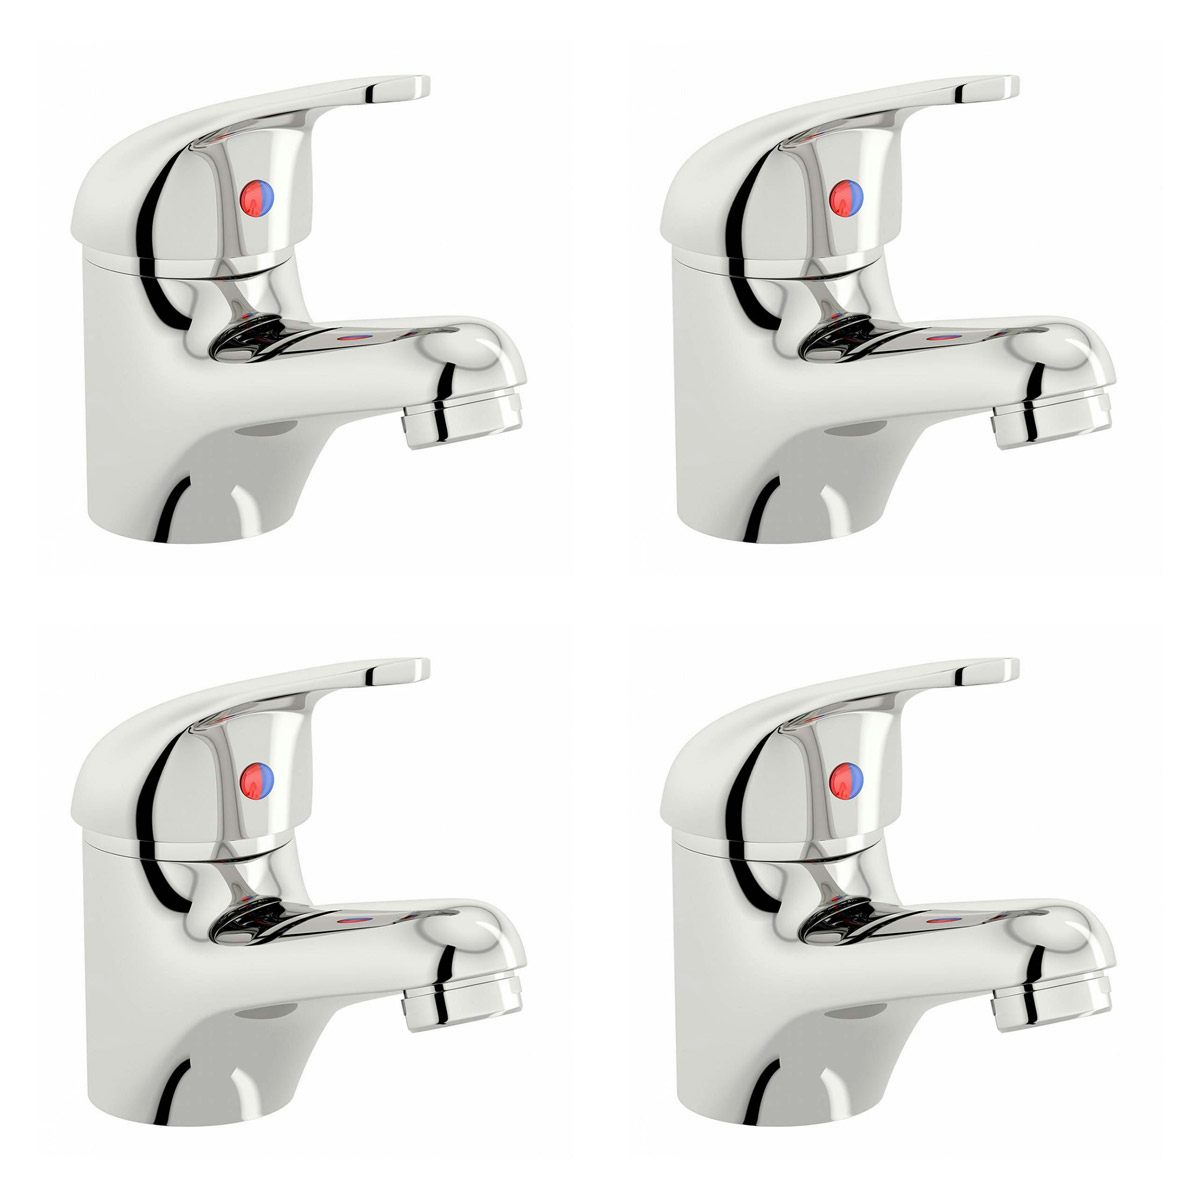 Pack of 4 Clarity single lever basin mixer taps